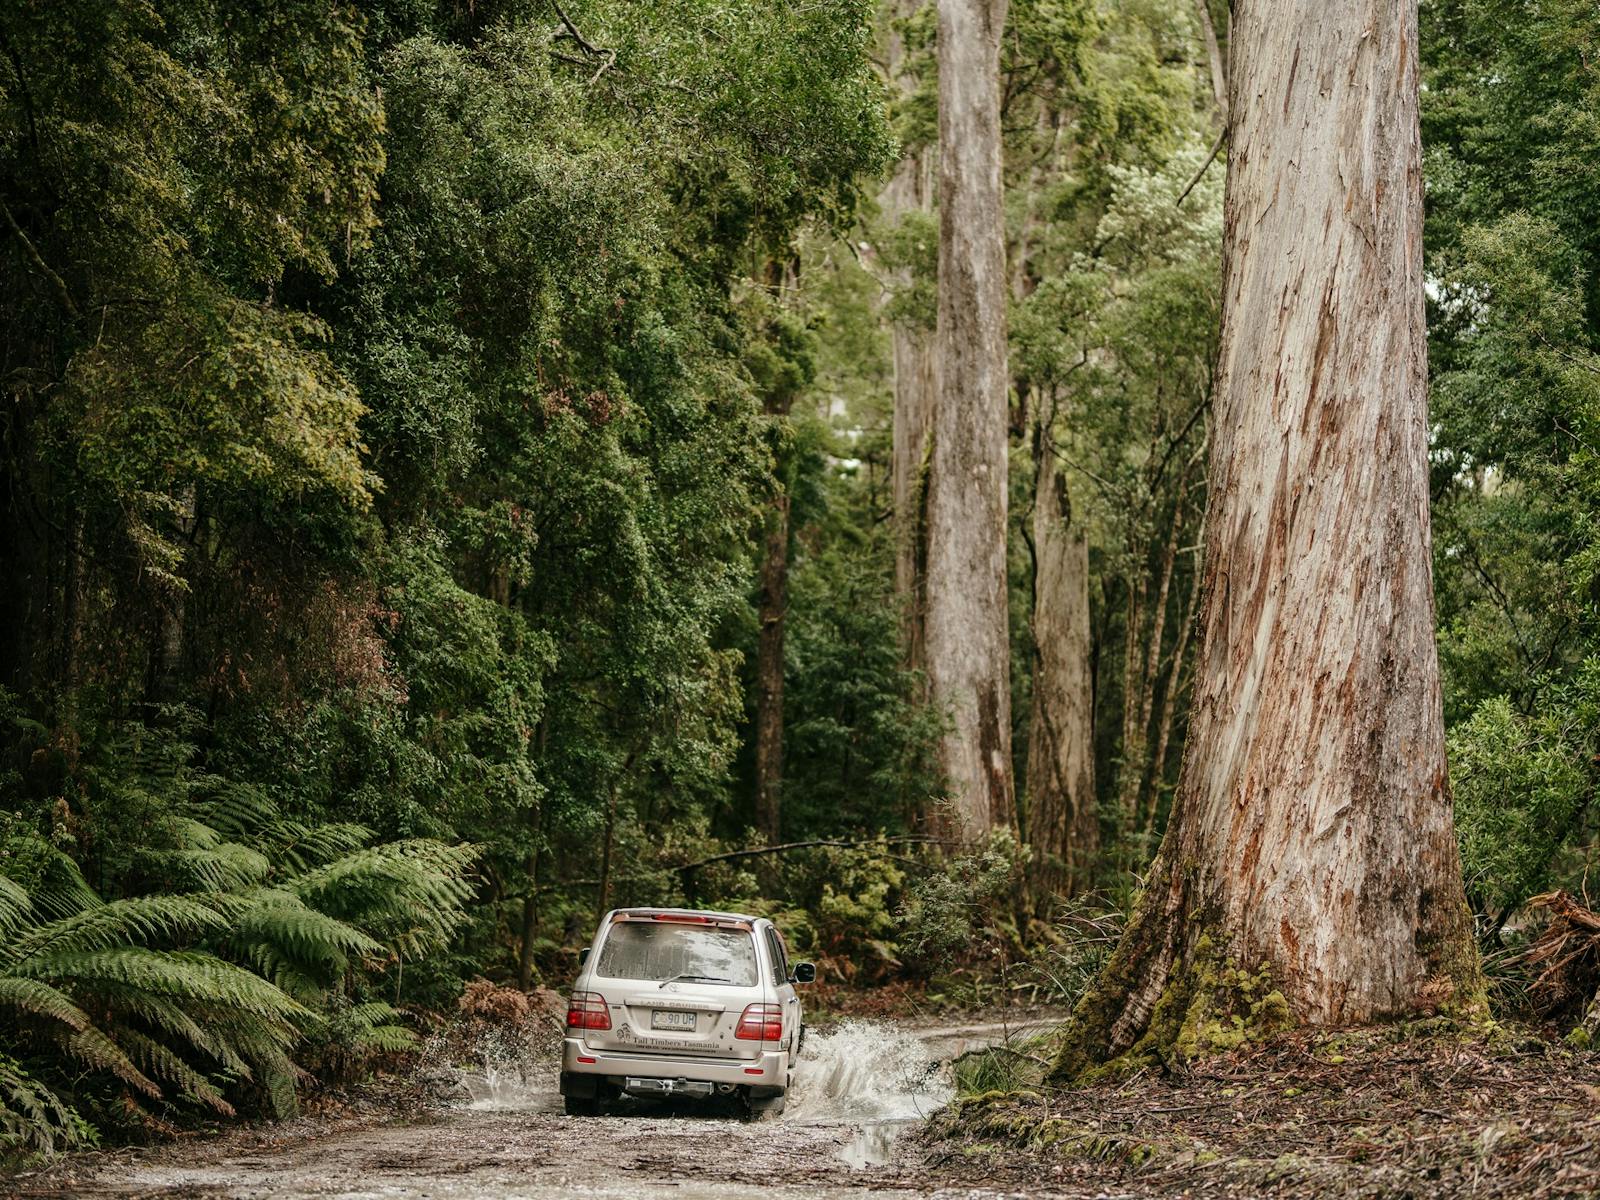 Tall Timbers vehicle splashing through a large puddle on the track road between huge trees